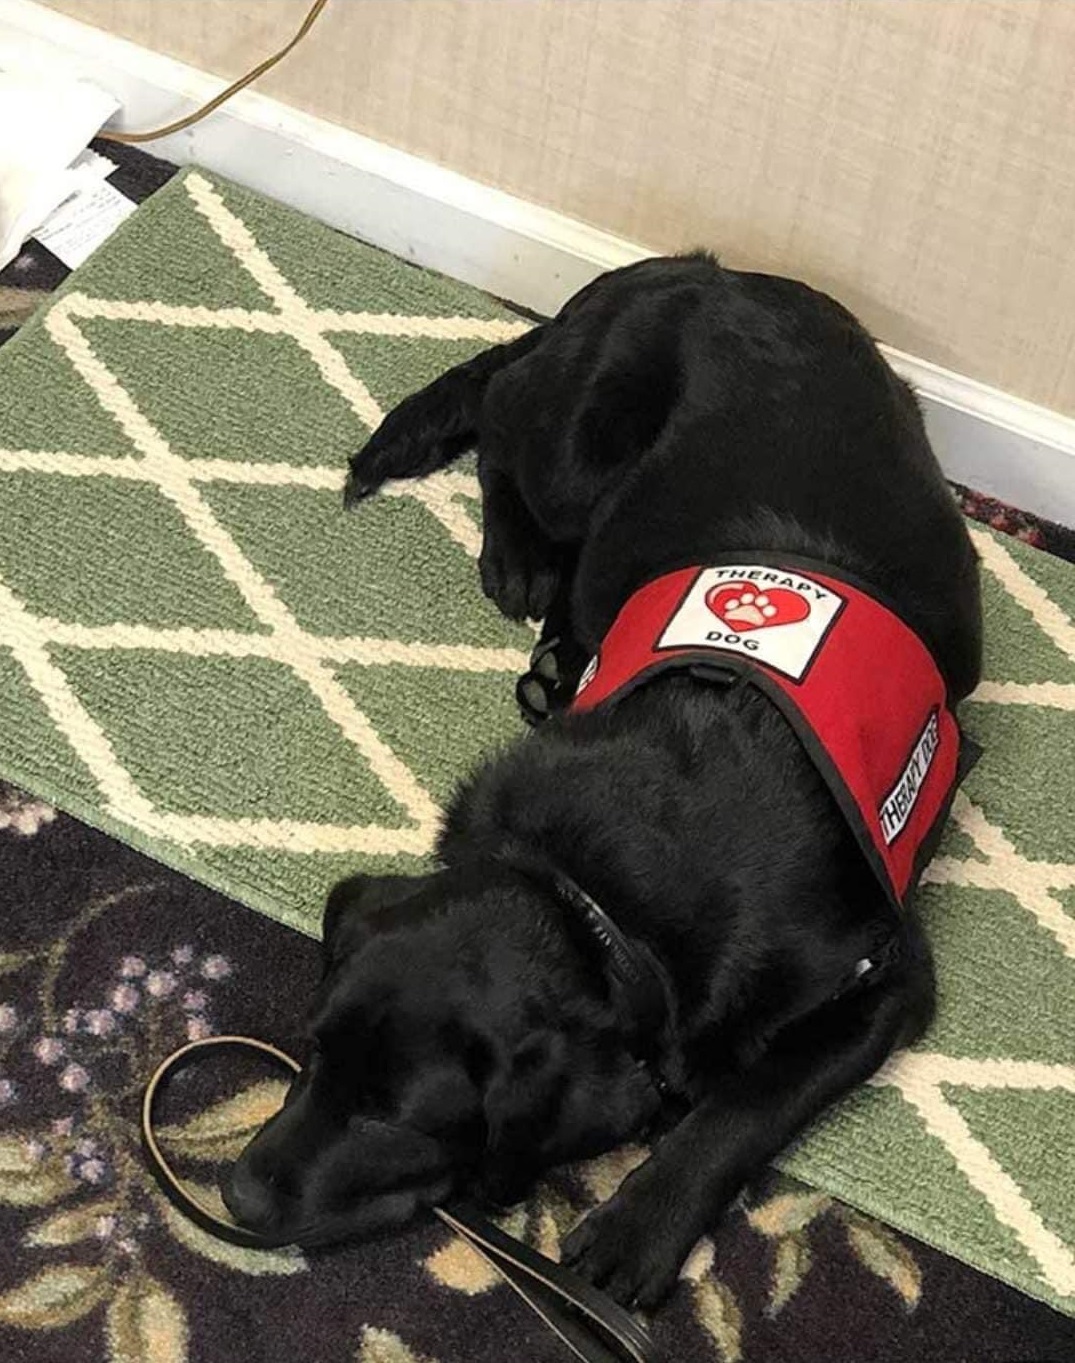 black lab therapy dog wearing vest who comforts grieving people in funeral home.